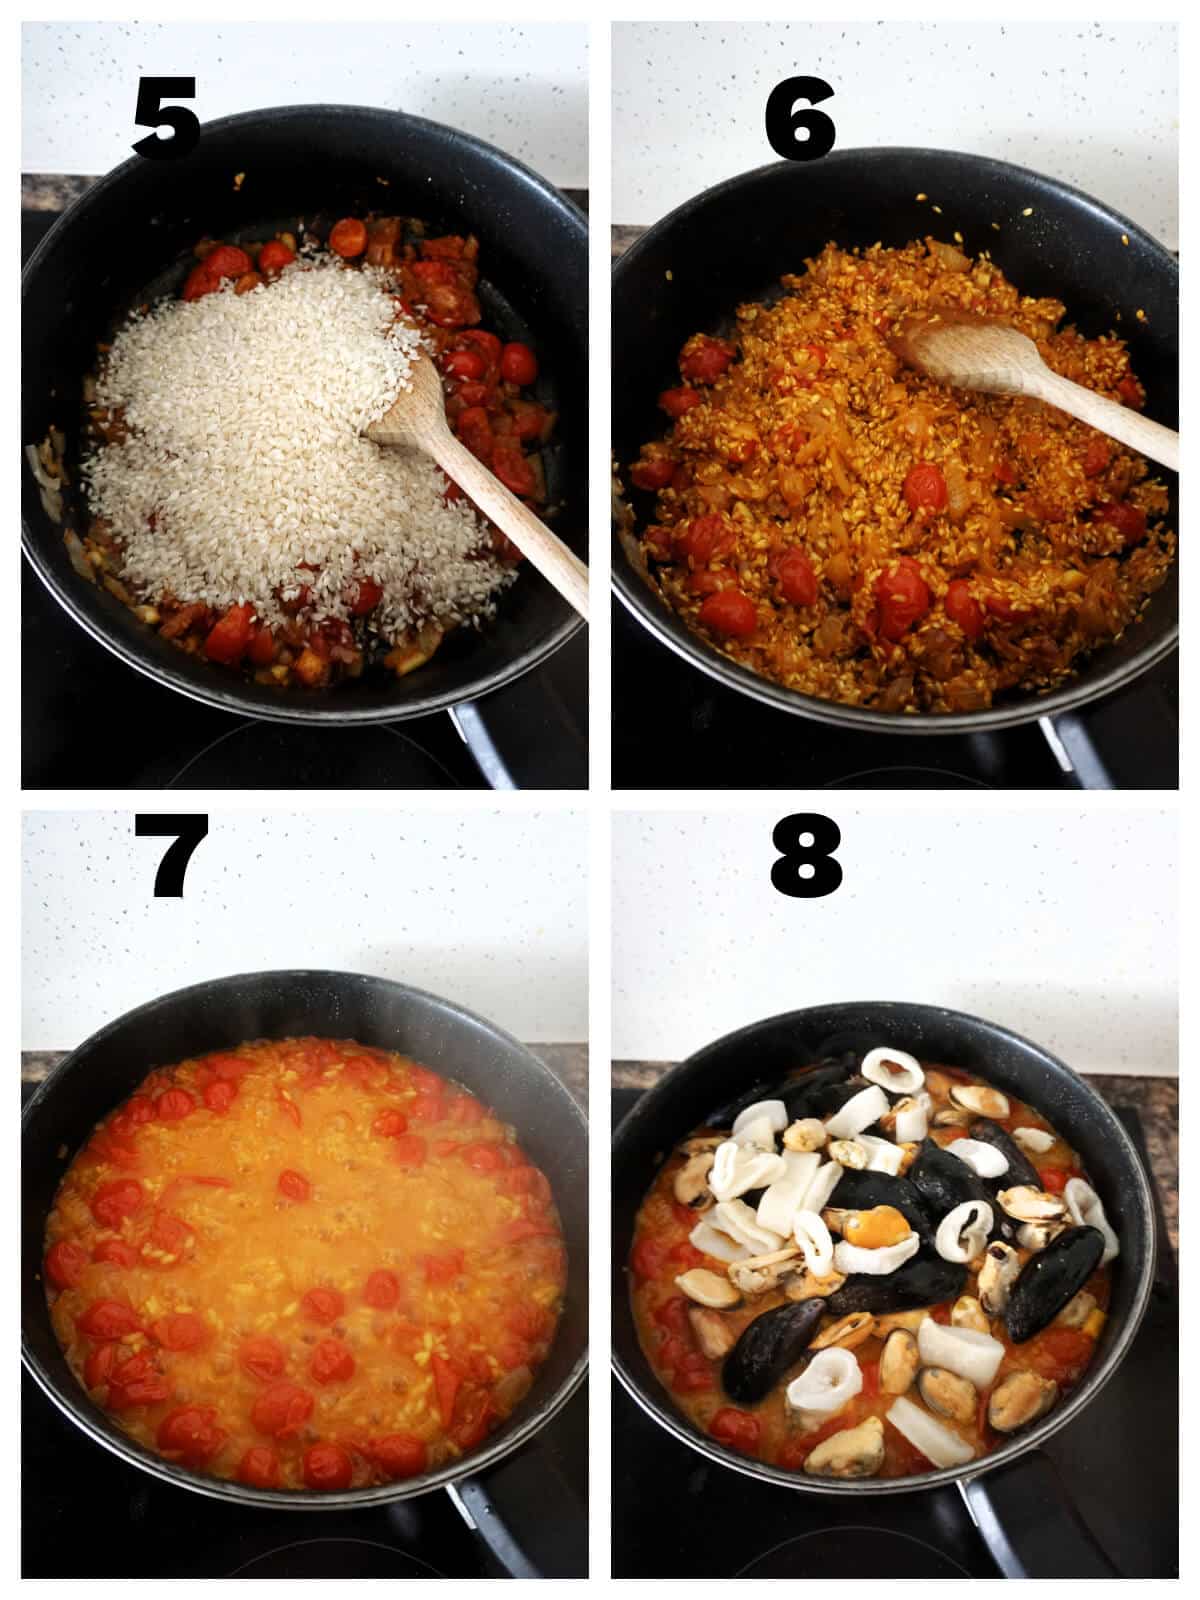 Collage of 4 photos to show how to make paella.